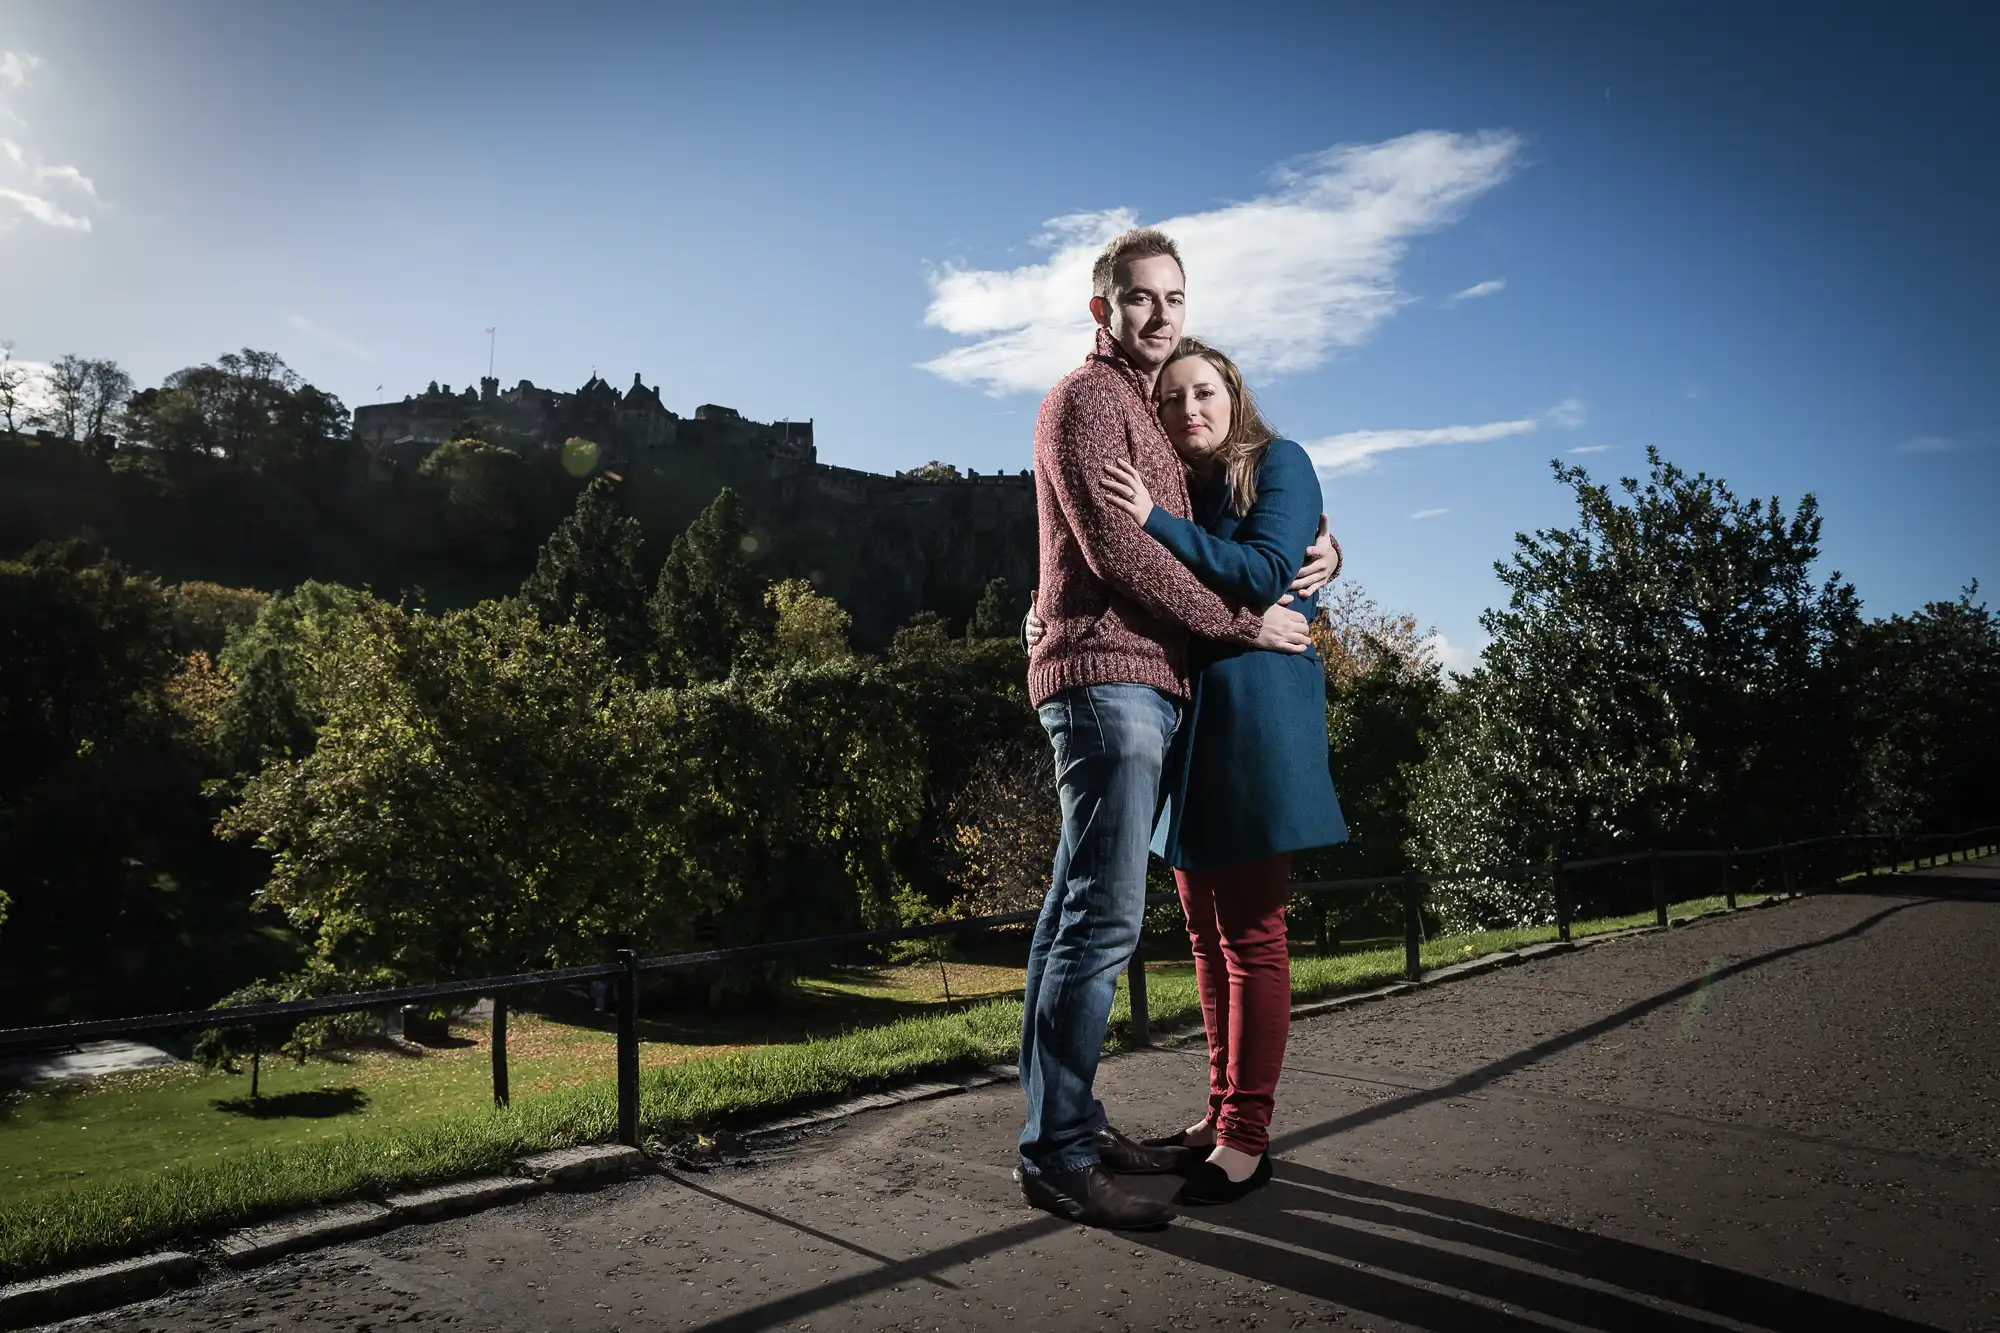 A couple embraces while standing on a path in a park, with a castle on a hill visible in the background under a blue sky.